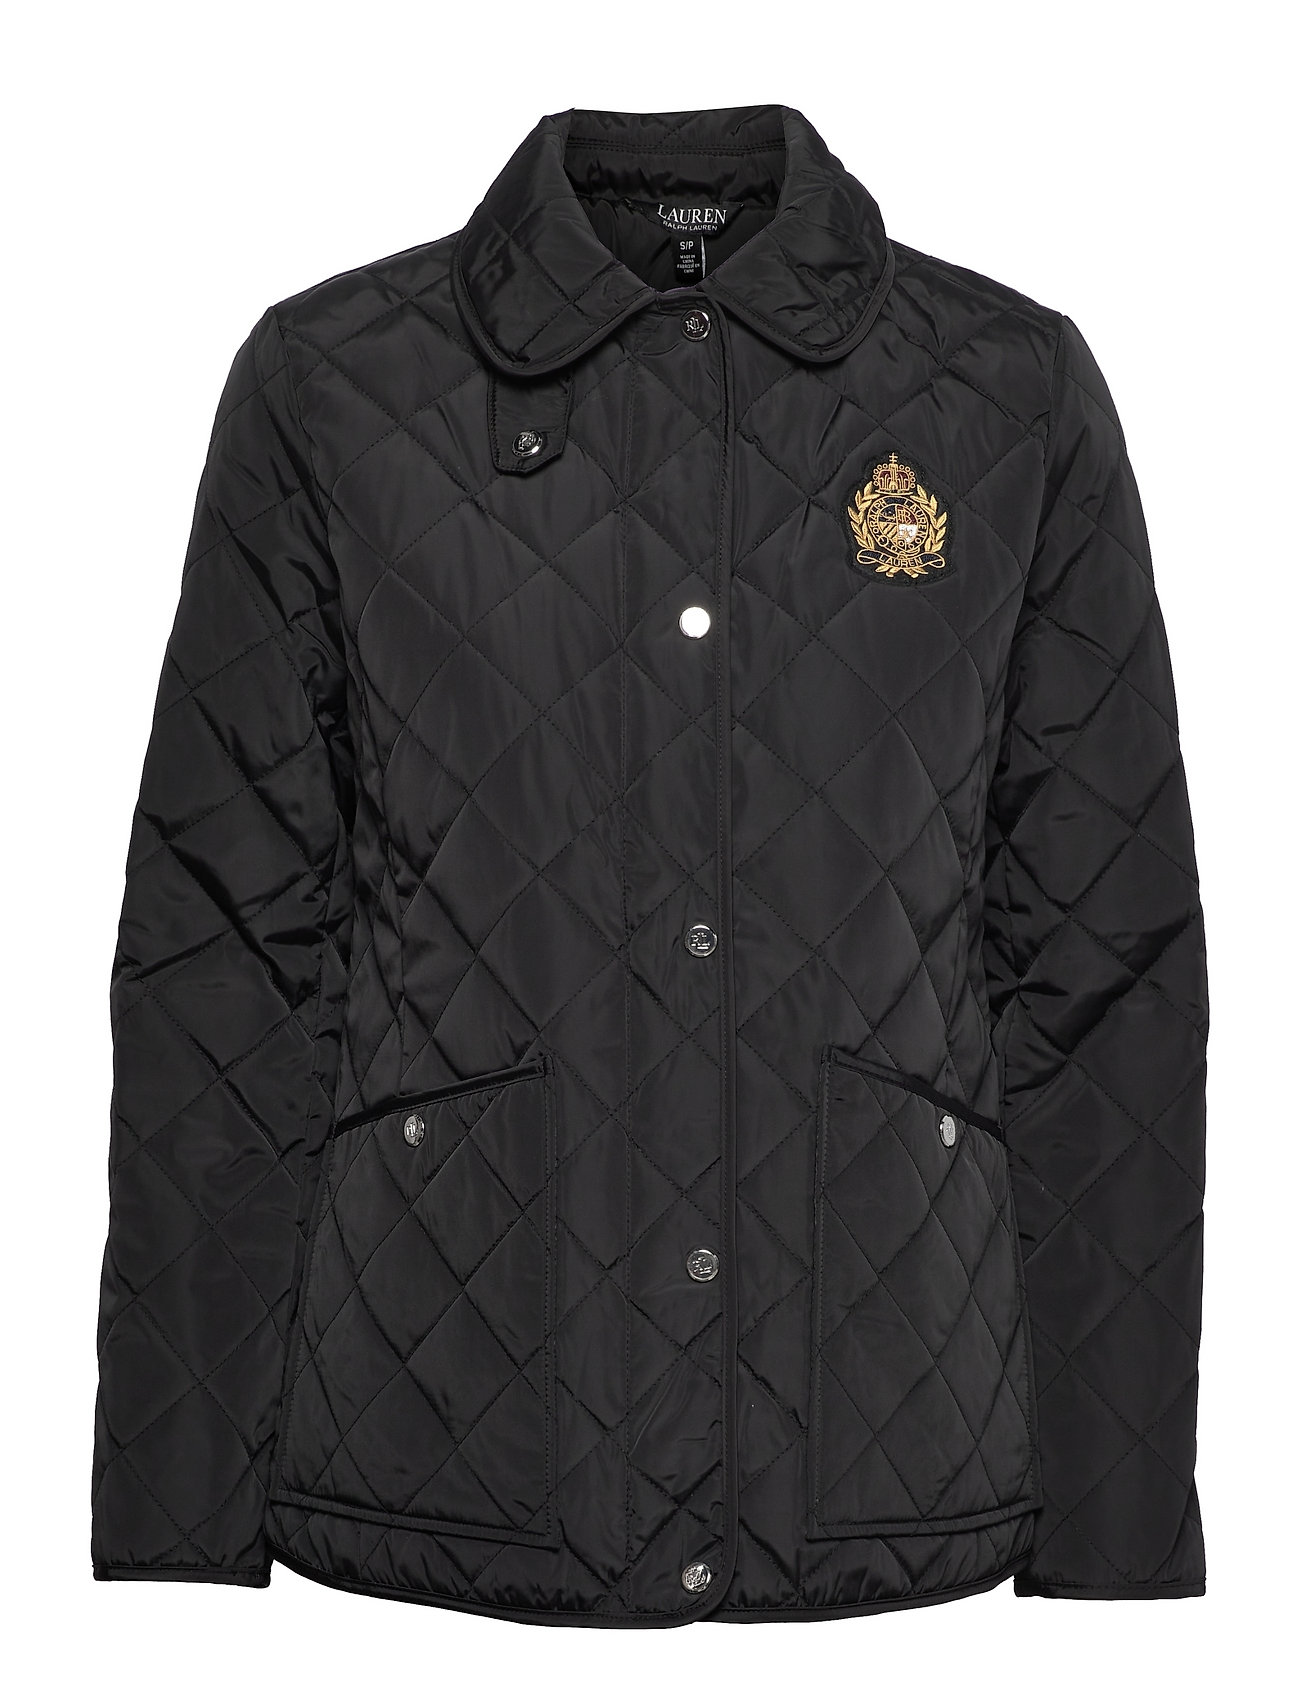 Lauren Ralph Lauren Crest-patch Quilted Jacket  €. Buy Quilted  jackets from Lauren Ralph Lauren online at . Fast delivery and  easy returns